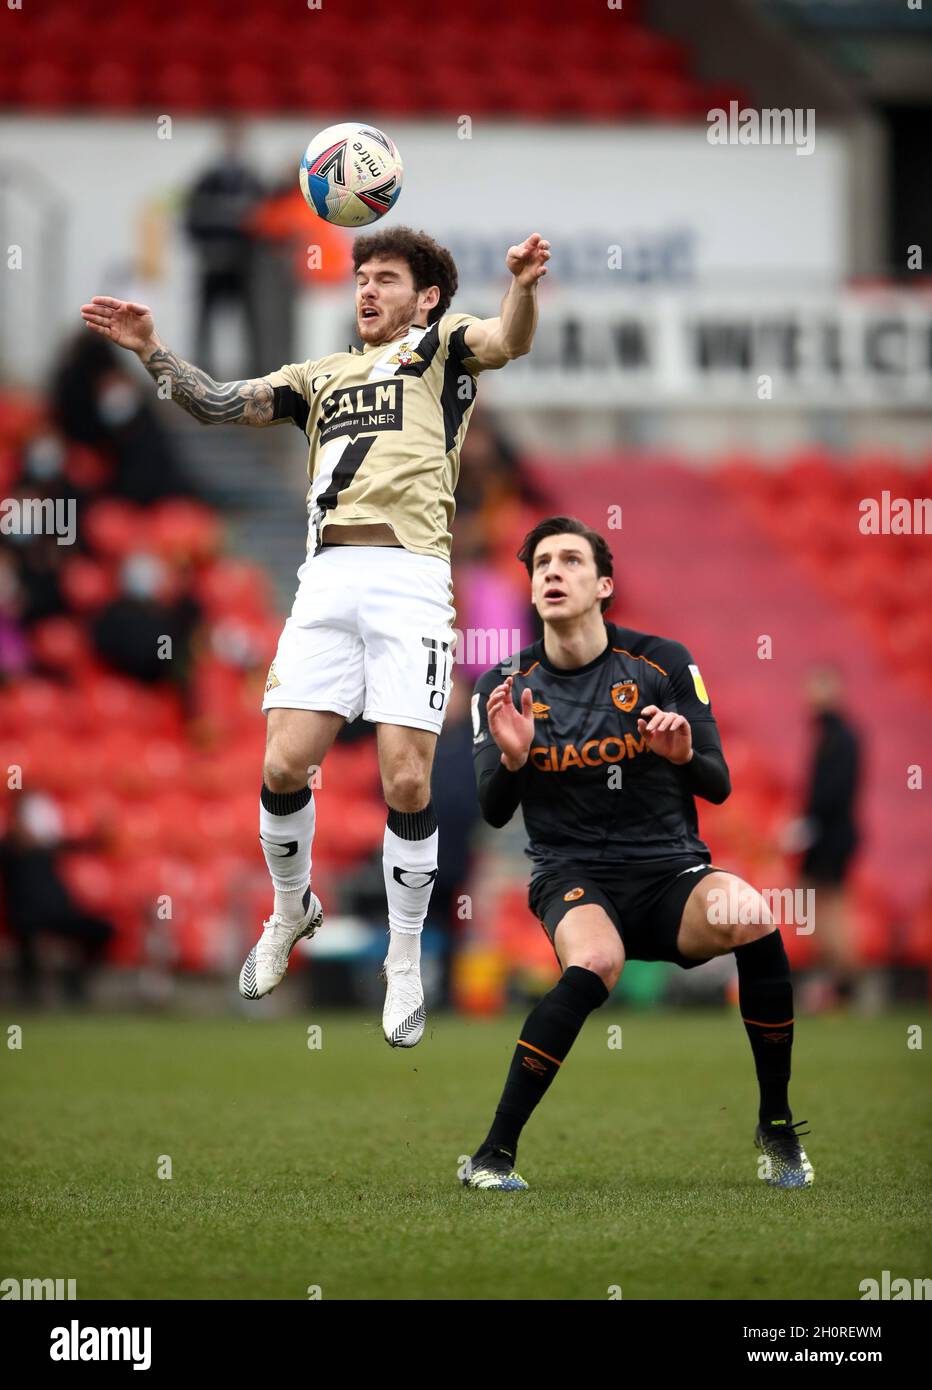 File photo dated 20-02-2021 of Doncaster Rovers' Jon Taylor (left) and Hull City's Alfie Jones (right) battle for the ball. Doncaster’s Jon Taylor is set to make a long-awaited return in their League One clash with Wycombe. Issue date: Thursday October 14, 2021. Stock Photo